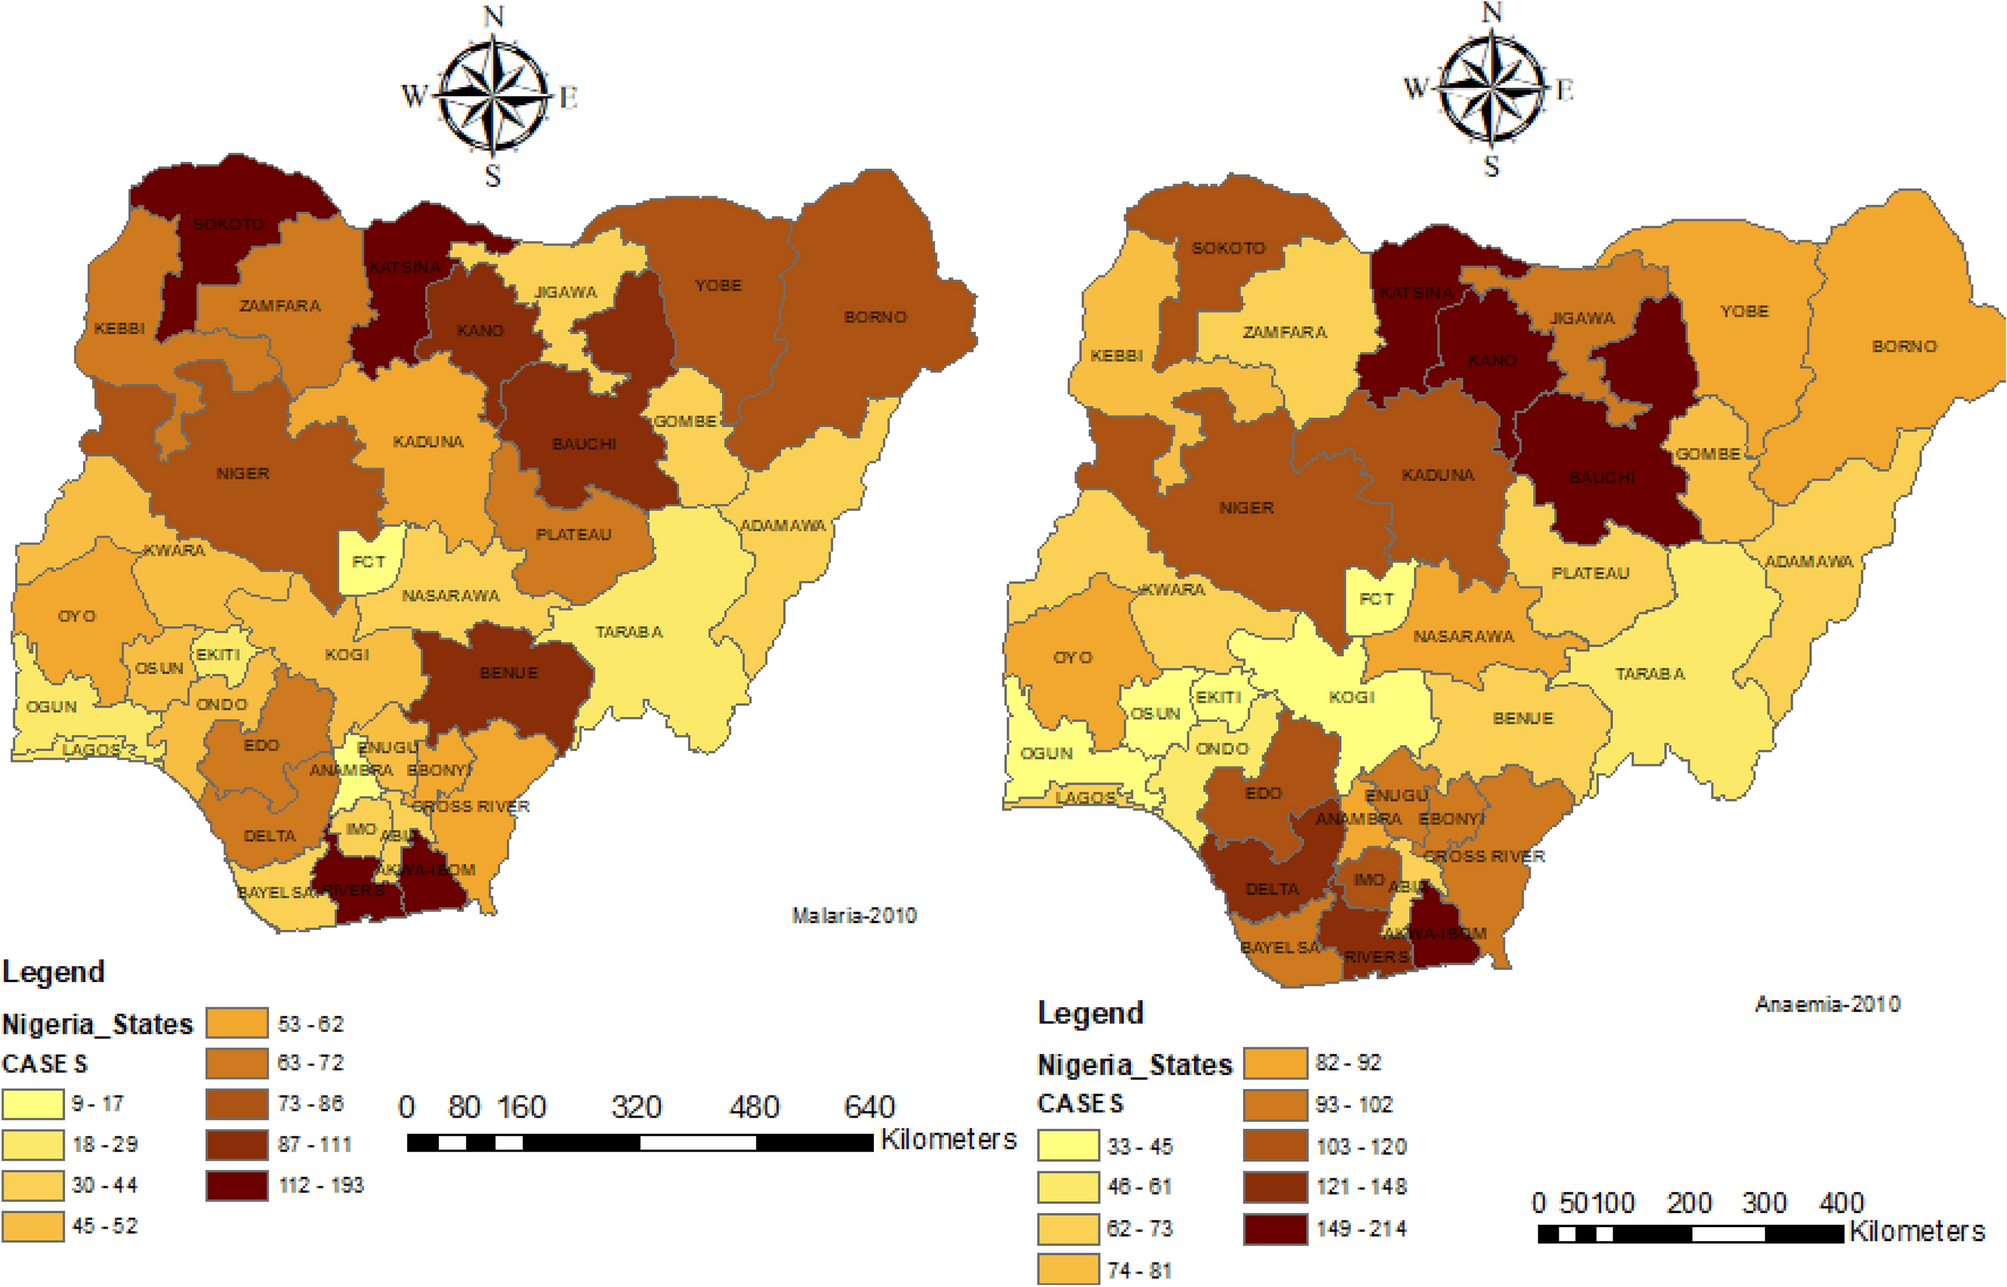 Spatial variation and risk factors of malaria and anaemia among children  aged 0 to 59 months: a cross-sectional study of 2010 and 2015 datasets |  Scientific Reports